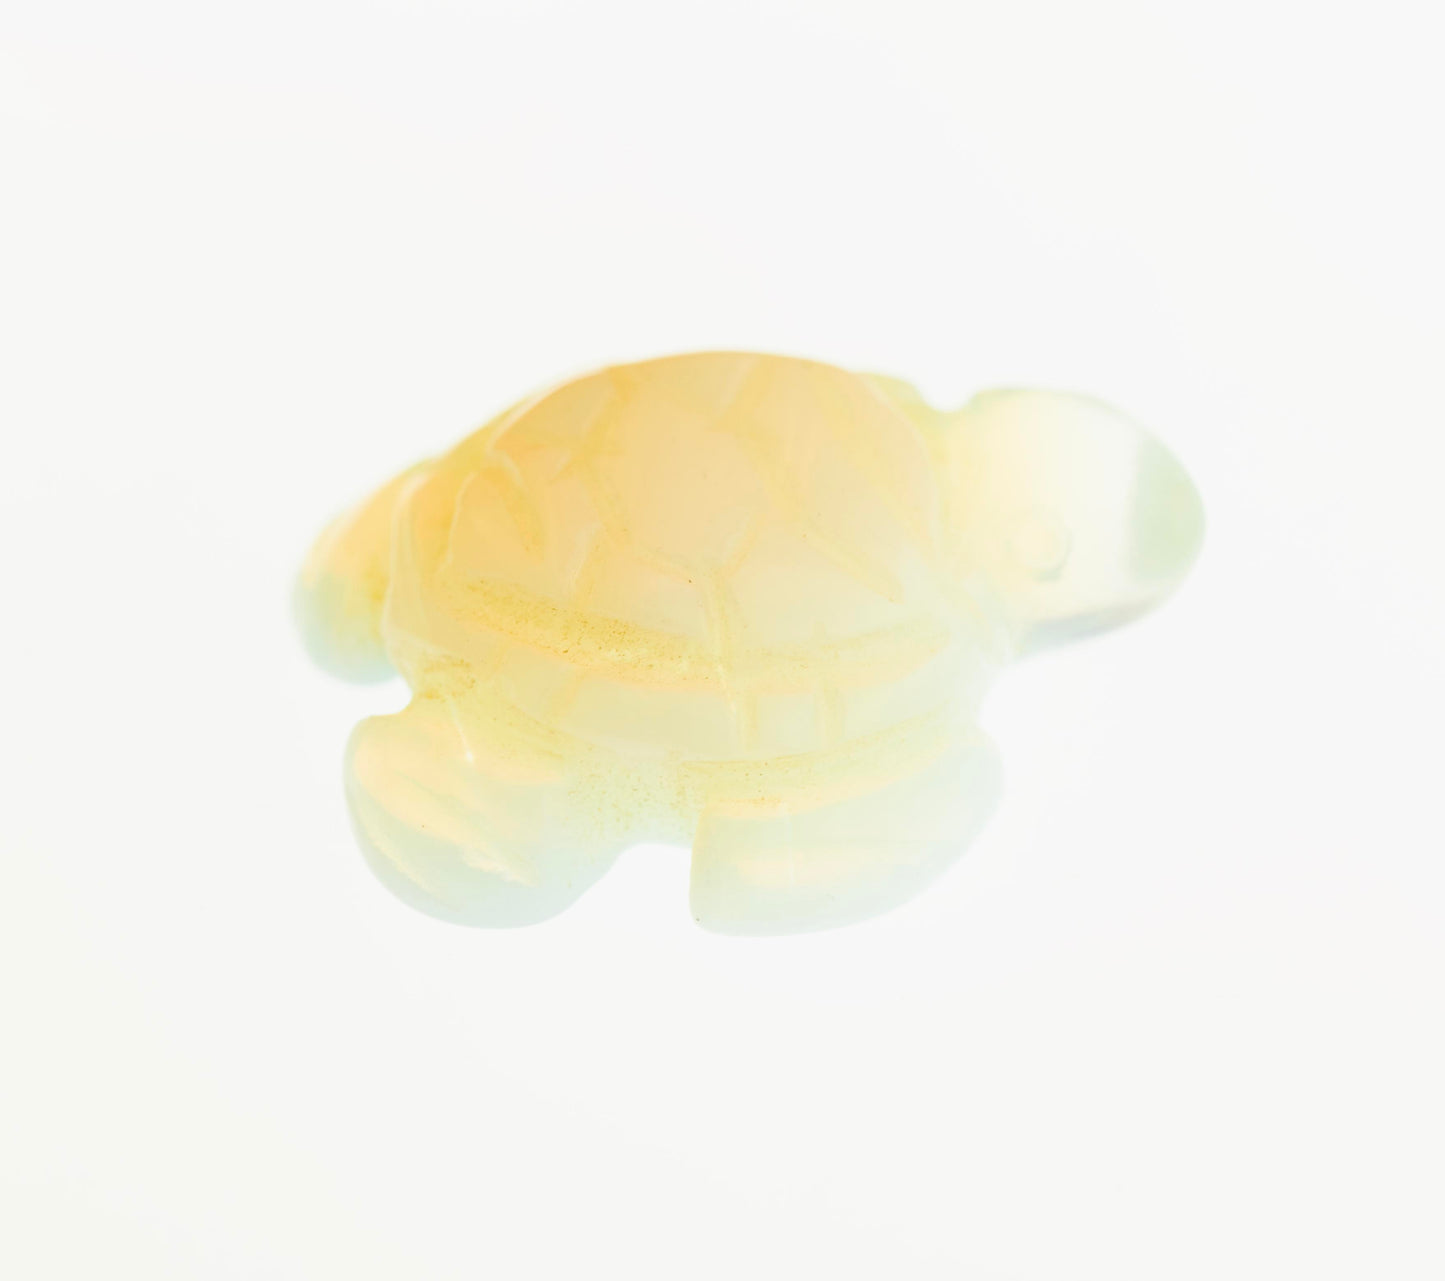 Close-up of a small, light-yellow, translucent plastic or resin turtle figurine on a white background, reminiscent of delicate Carved Turtle Gemstone Figures crafted from Aventurine.